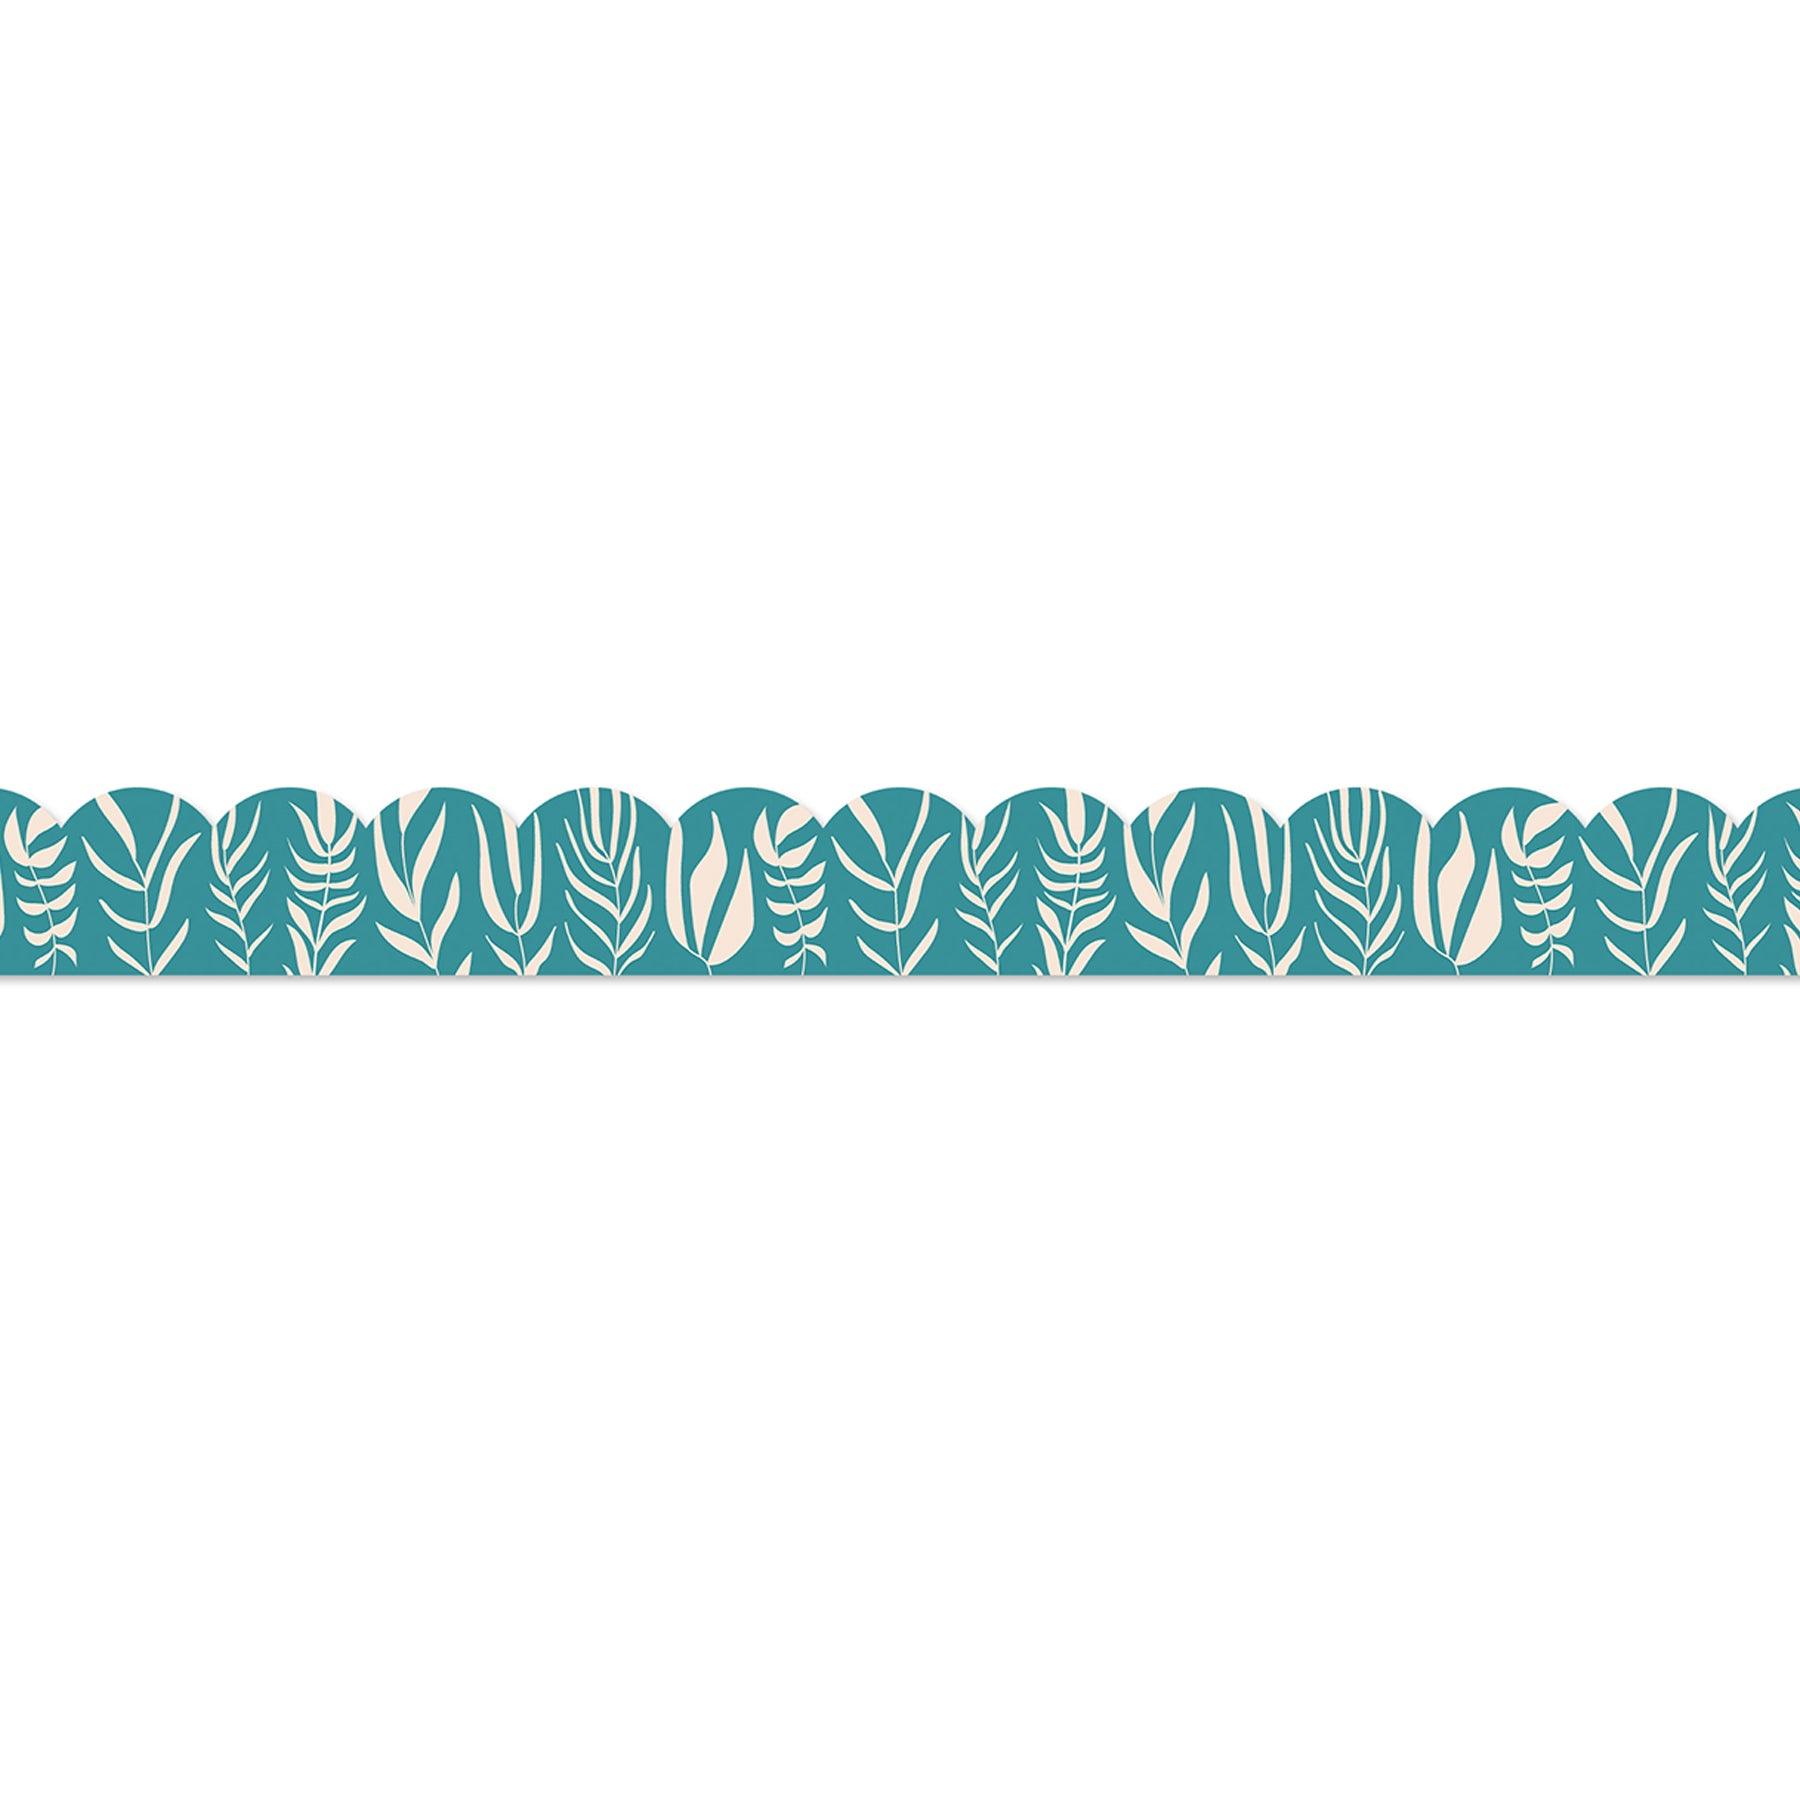 True to You Teal with Leaves Scalloped Bulletin Board Borders, 39 Feet Per Pack, 6 Packs - Loomini